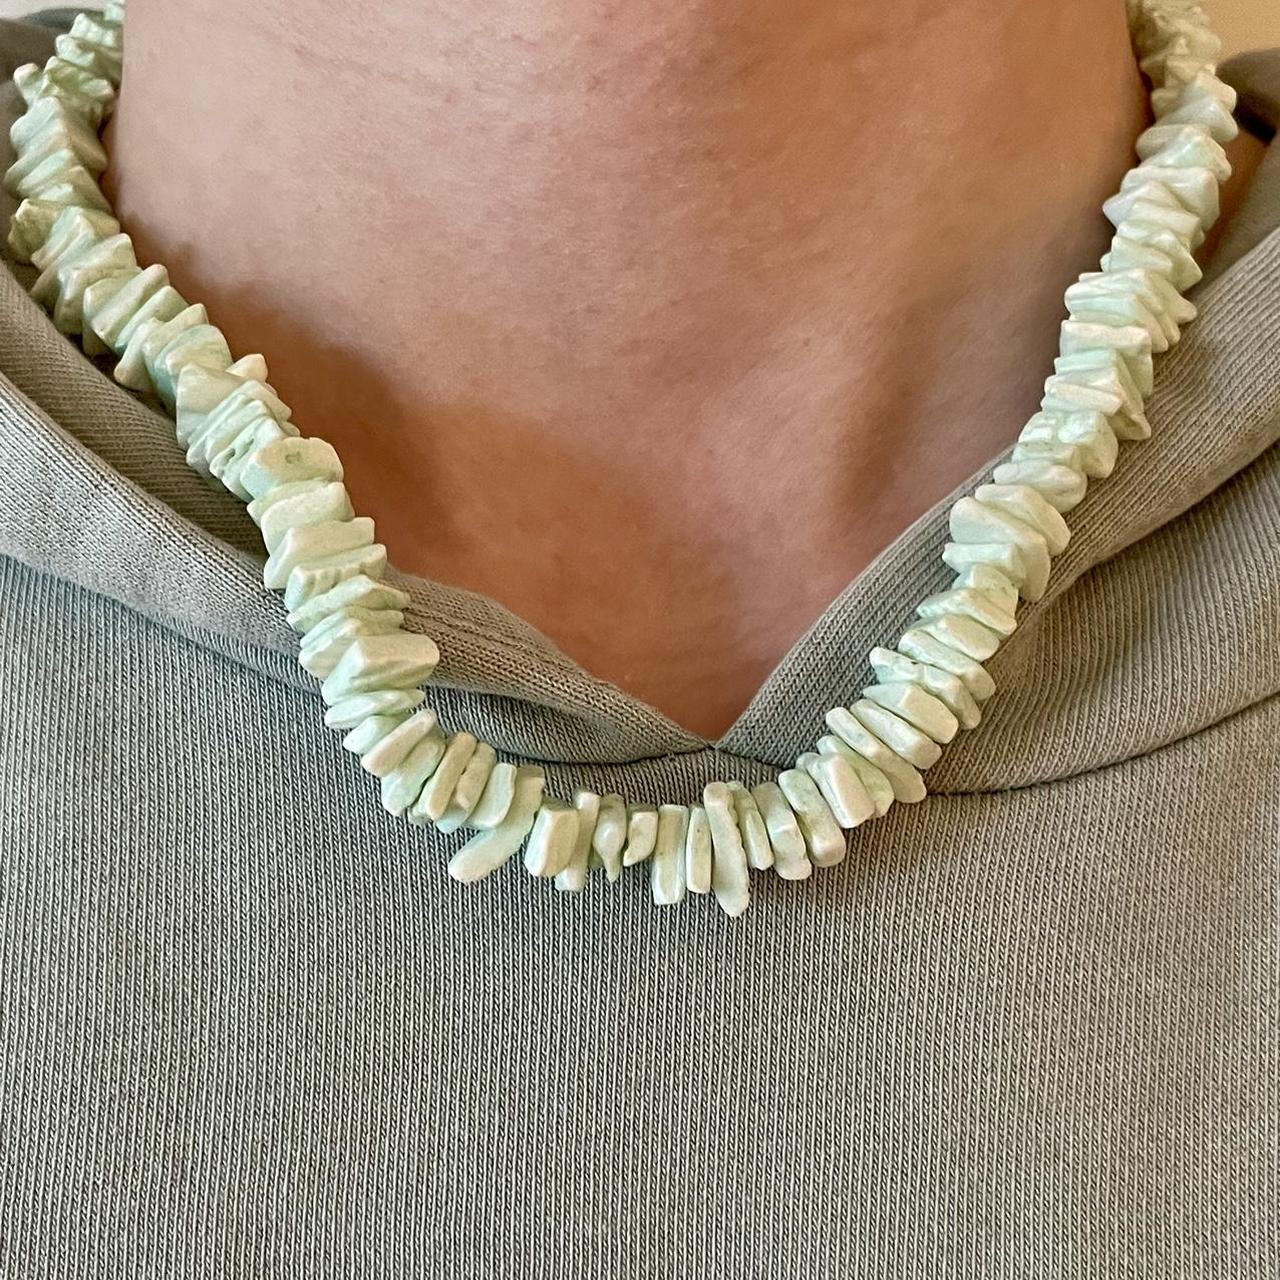 90s Jewelry: A Guide to Puka Shell Necklace & Other 90s Jewelry Trends | 90s  jewelry, 90s jewelry trends, 90s fashion